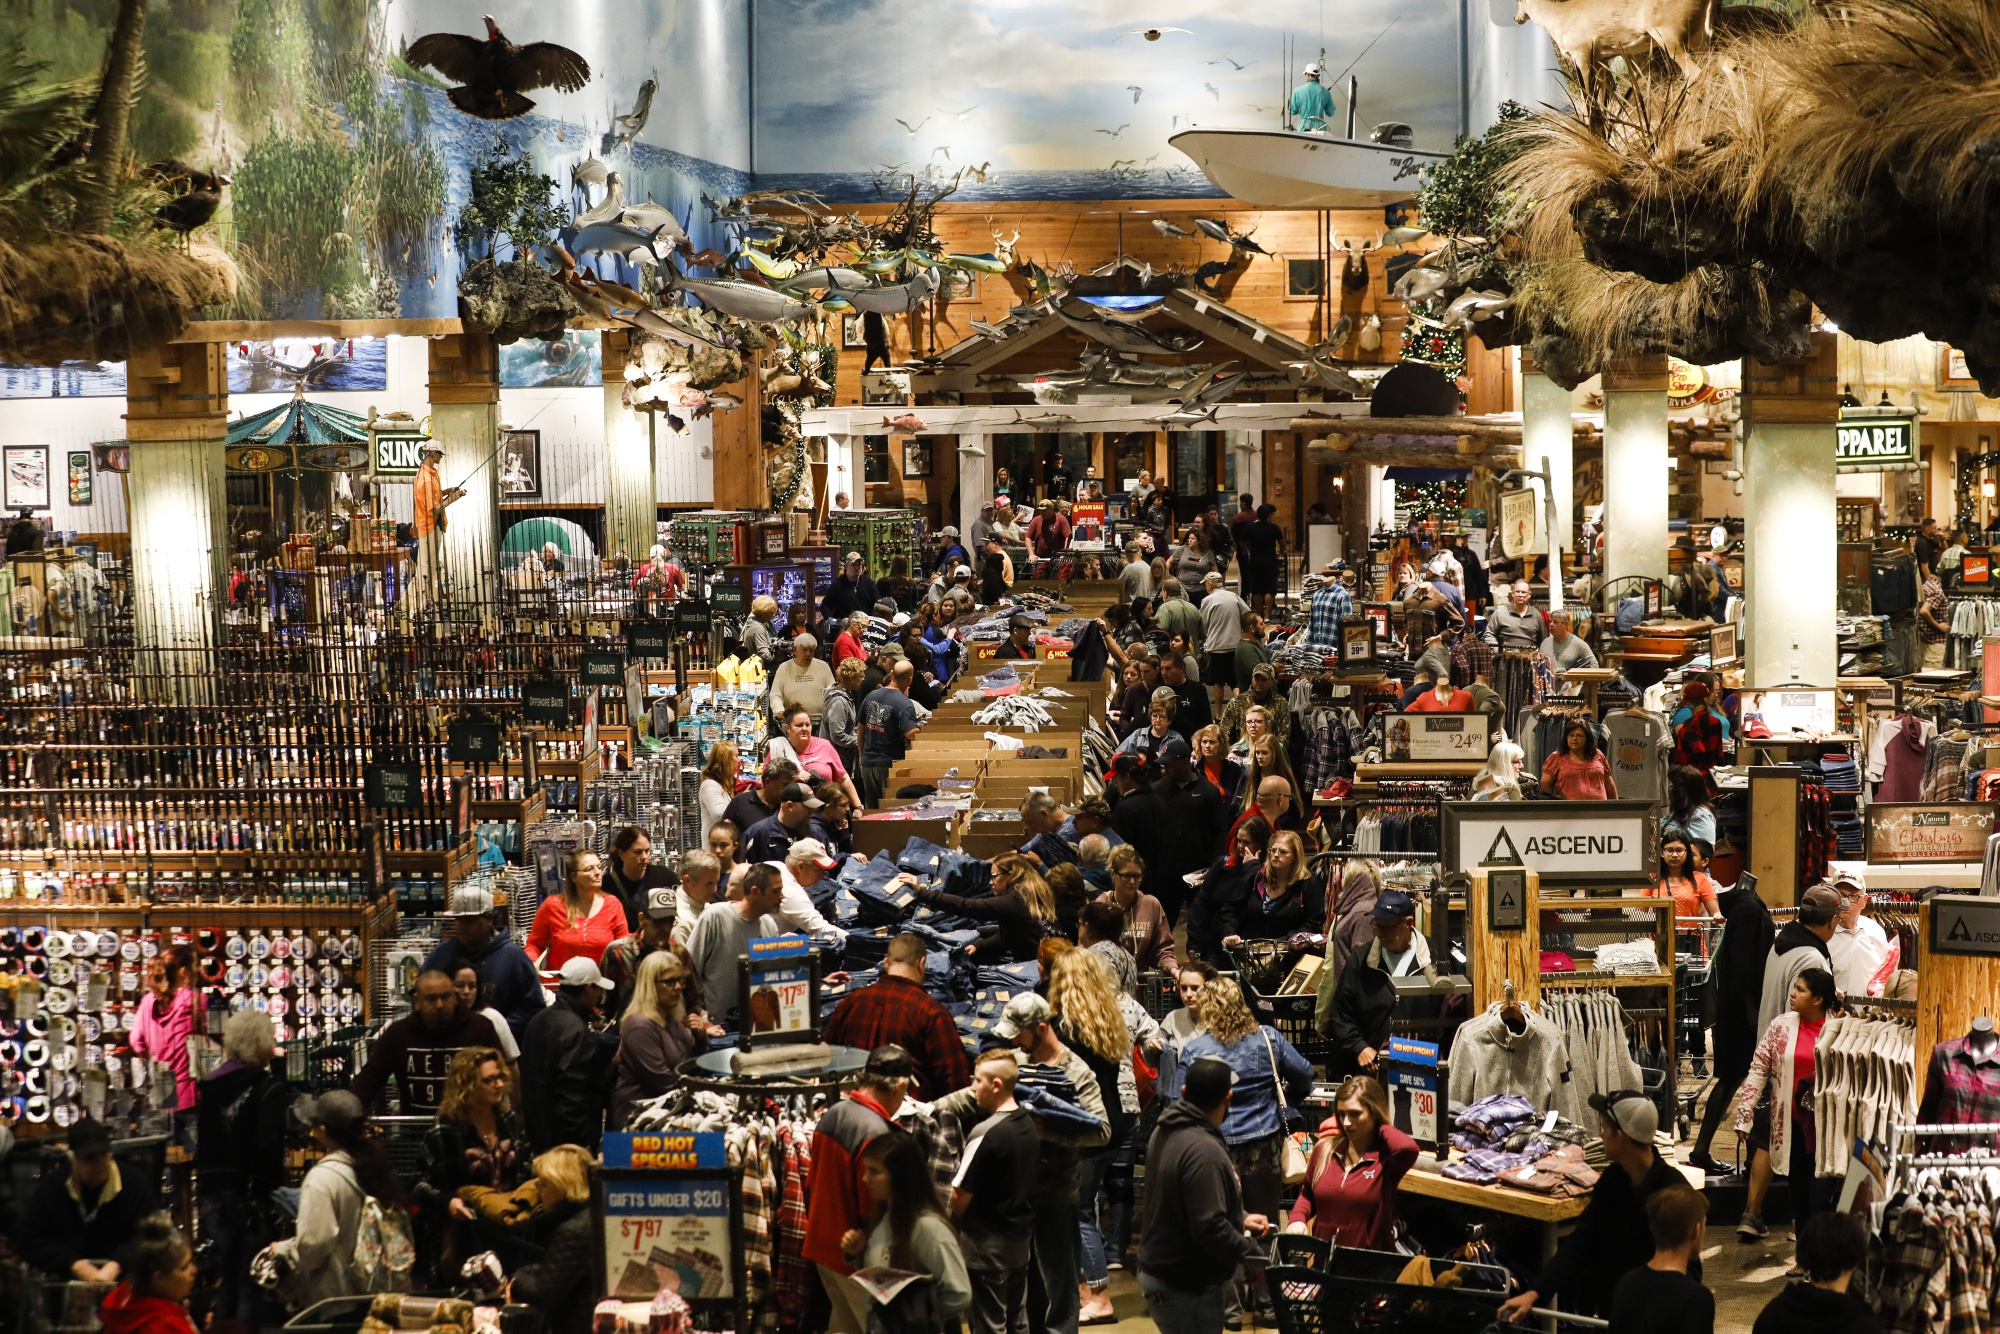 Bass Pro Shops Merger Is Called Off Amid Regulatory Pushback - Bloomberg